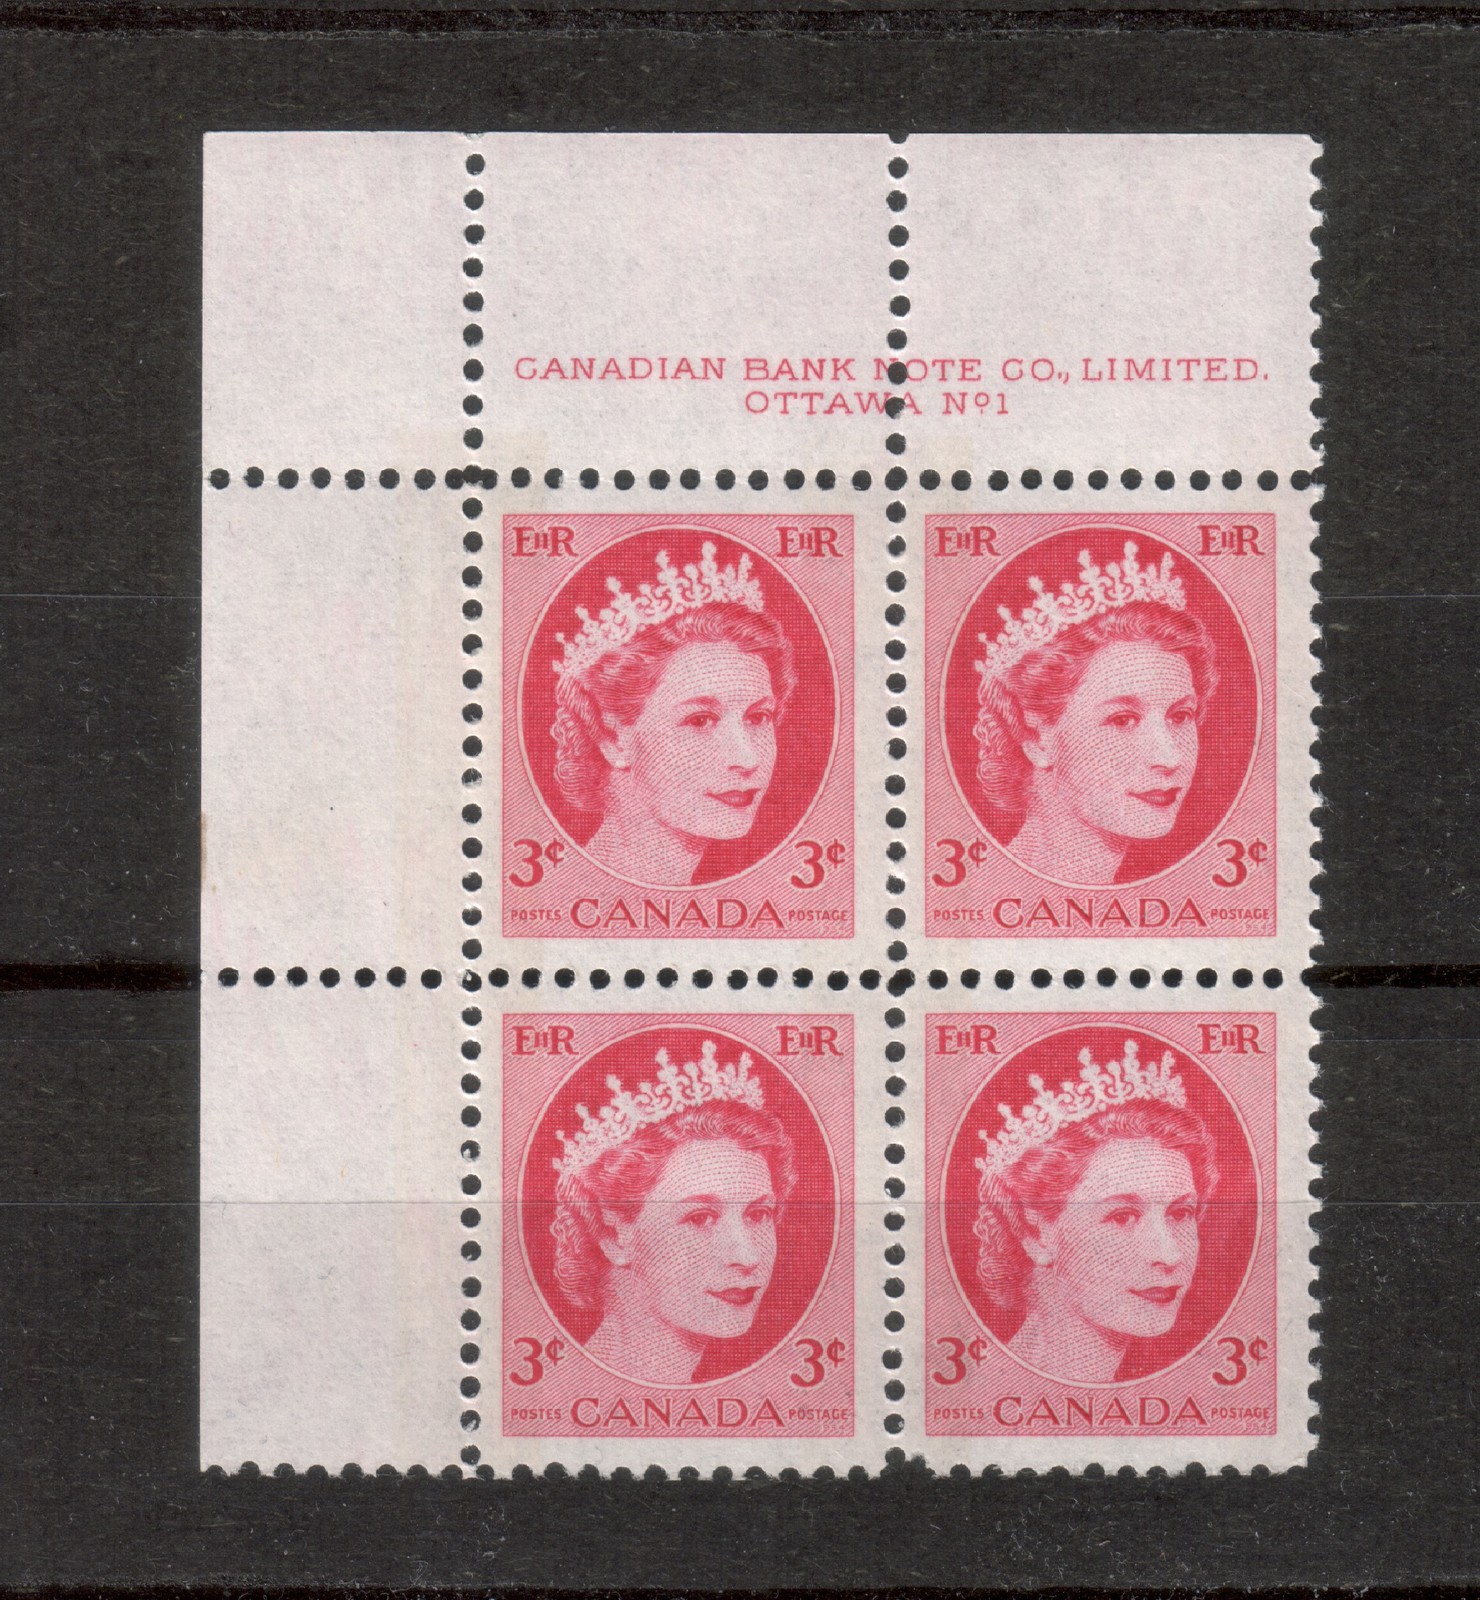 Primary image for Canada  -  SC#339p PL1 UL Mint NH  -  3 cent  QEII Wilding Portrait issue 